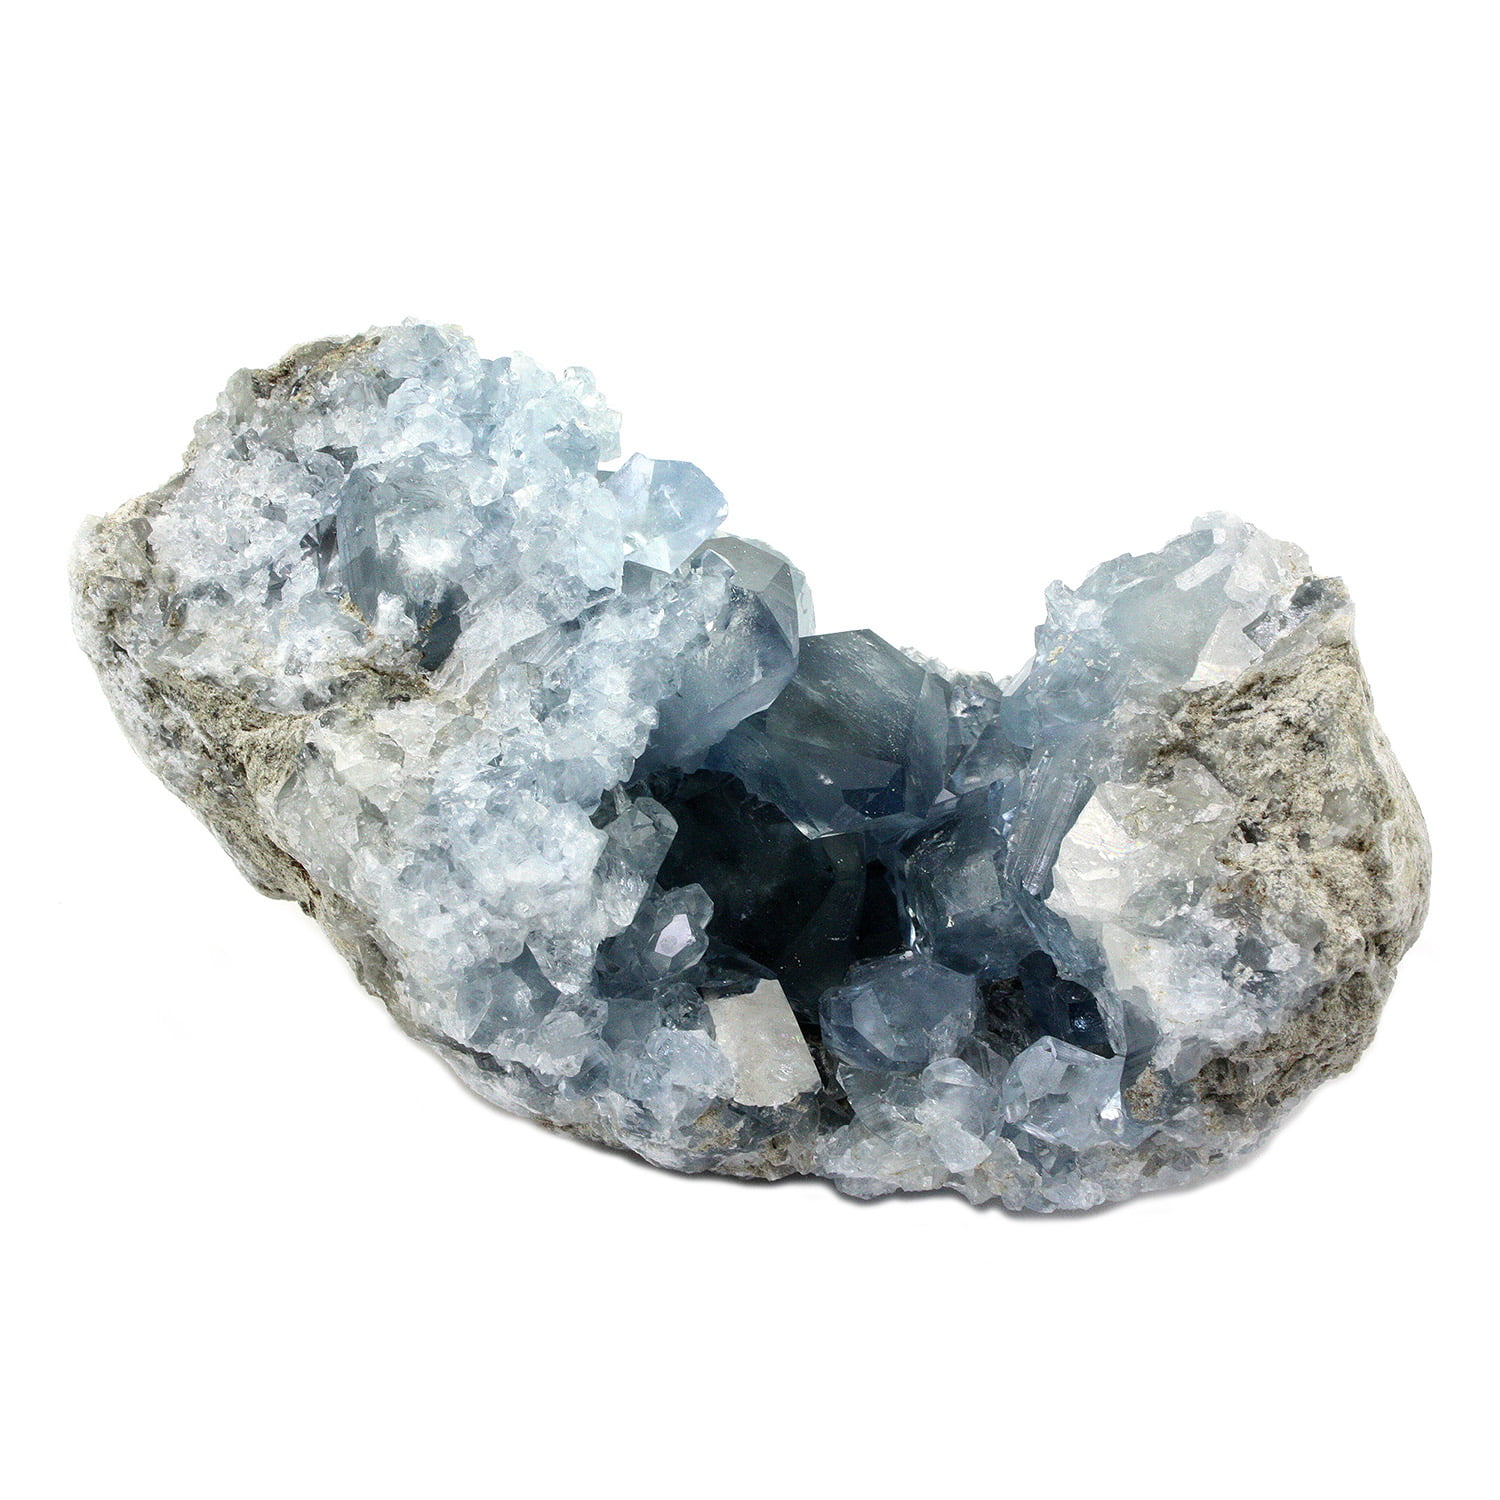 Crystal Allies Specimens: Natural Blue Celestite Crystal Cluster from  Madagascar - 1/2lb to 1lbs - Walmart.com